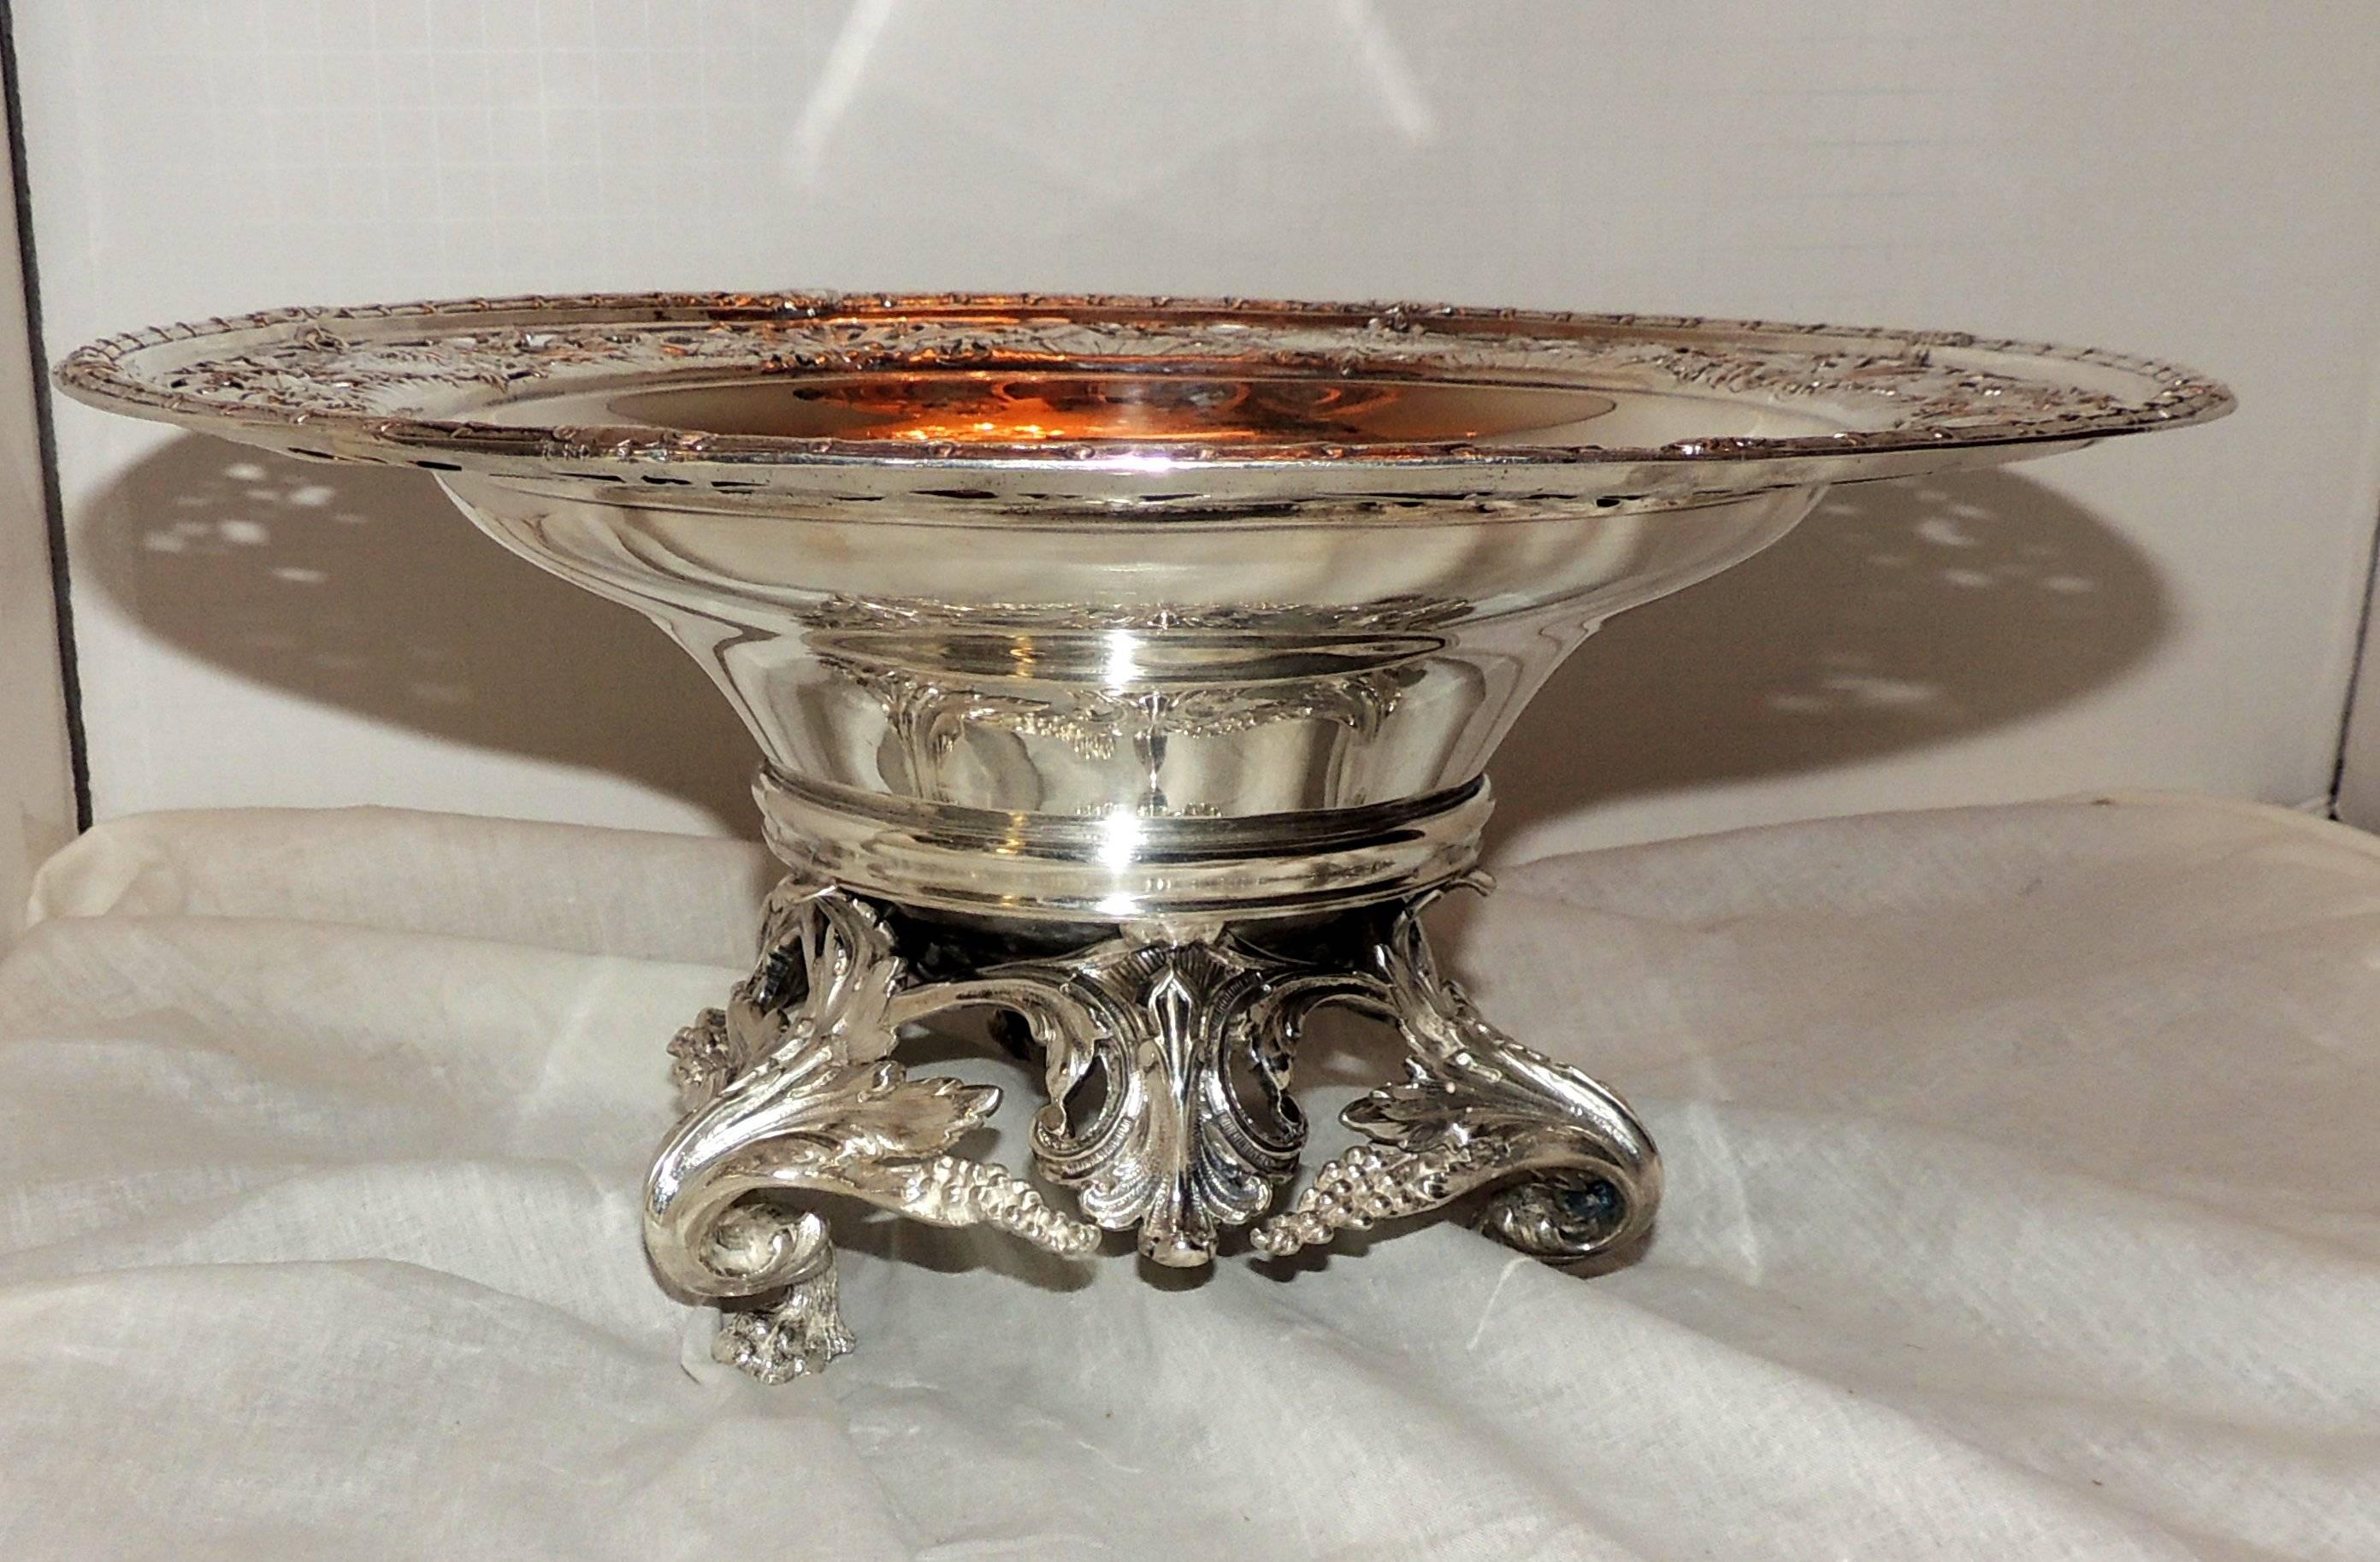 Redlich & Co. sterling silver footed floral pierced bowl centerpiece.
Beautiful footed pedestal with floral and scrolls.

Measures: 17" W x 7" H.

circa 1920s.
Approximately 62 troy oz.
No Monograms.